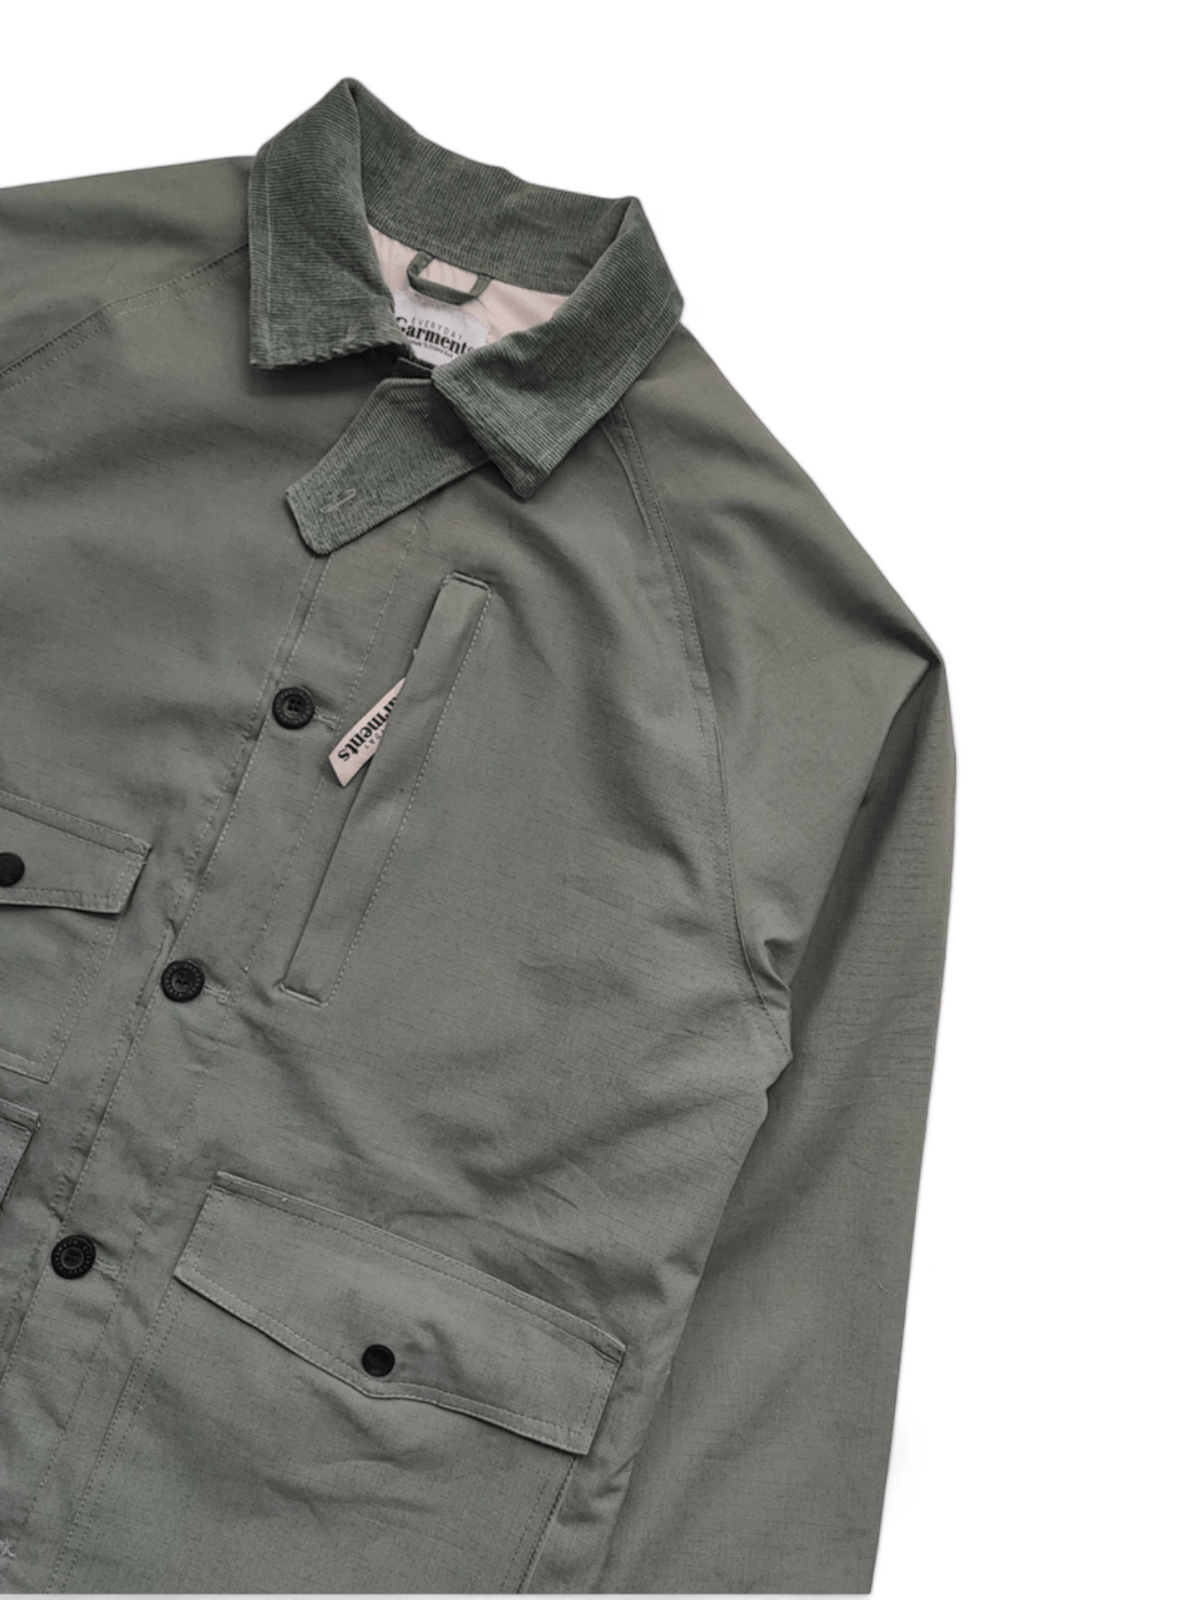 Image of Sydney Green Ripstop Coveralls 